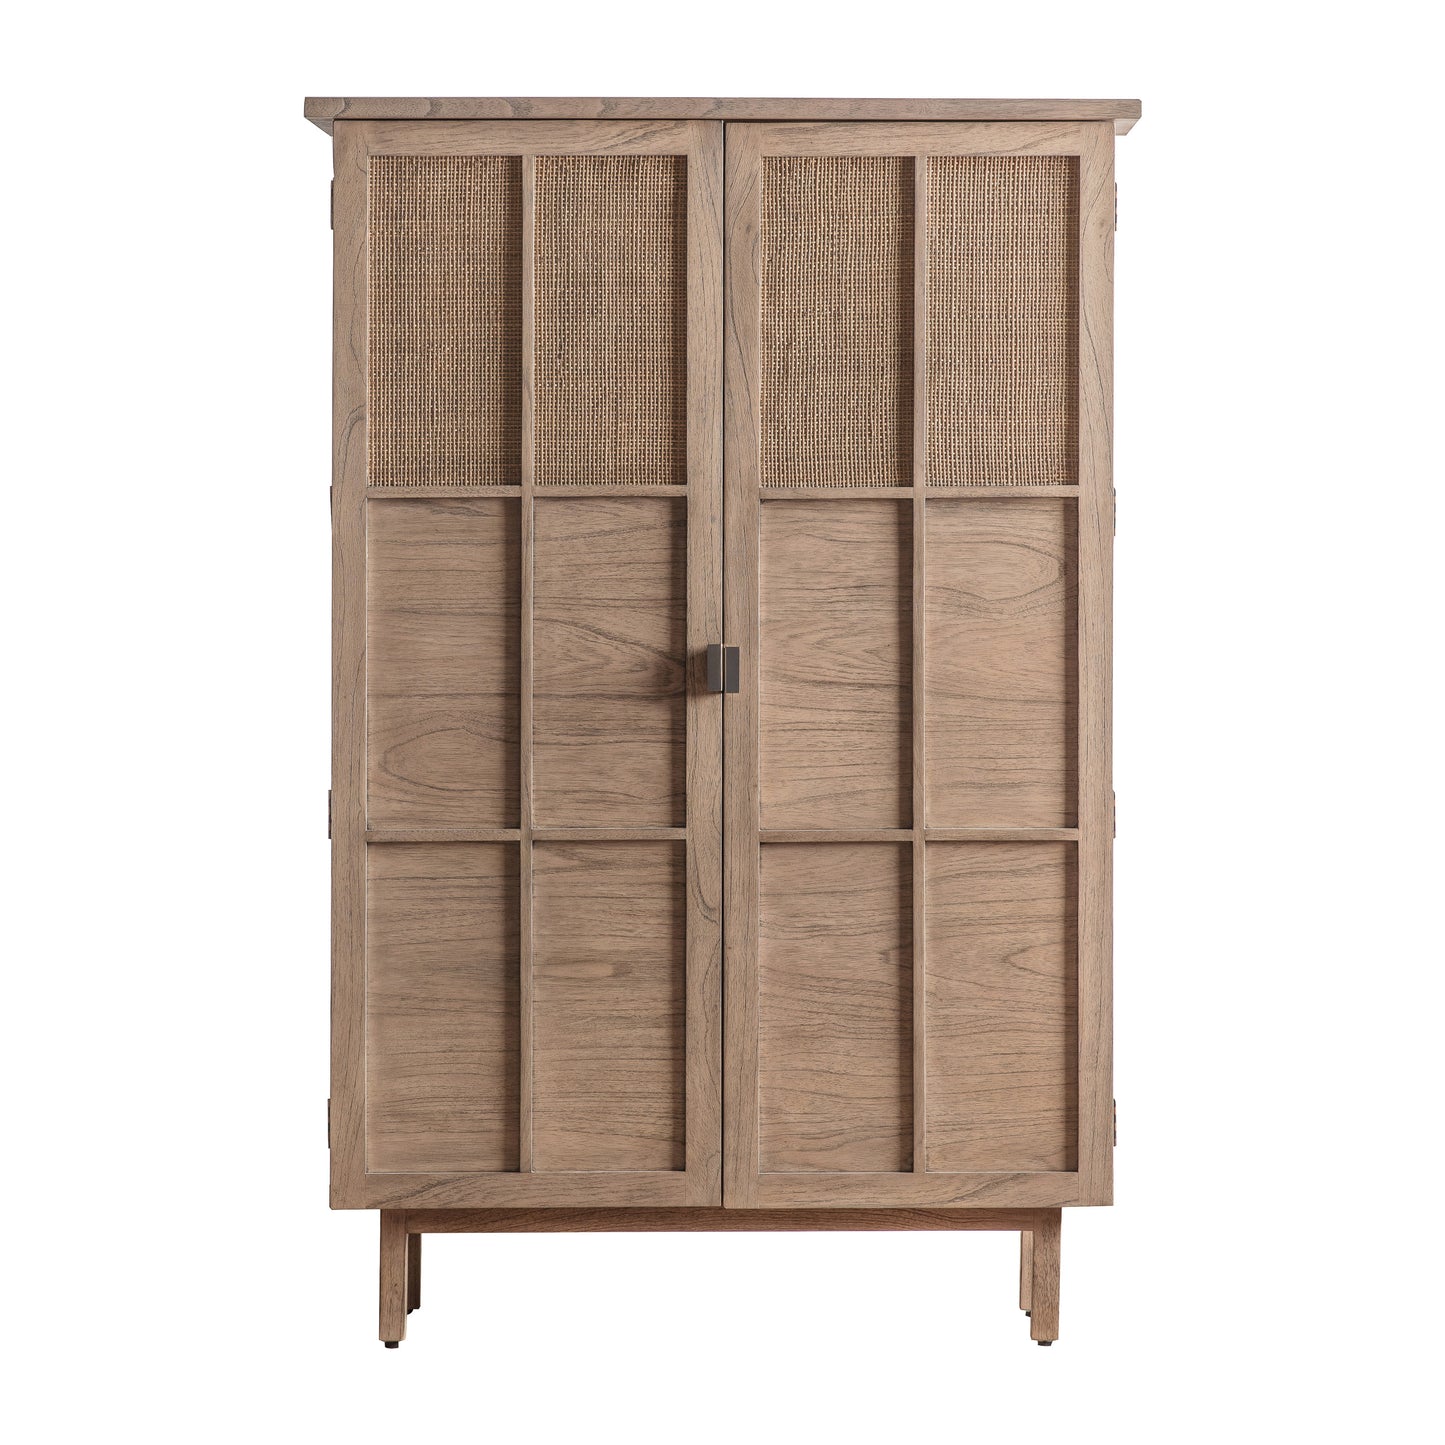 A rattan-door cupboard for home furniture and interior decor available from Kikiathome.co.uk.